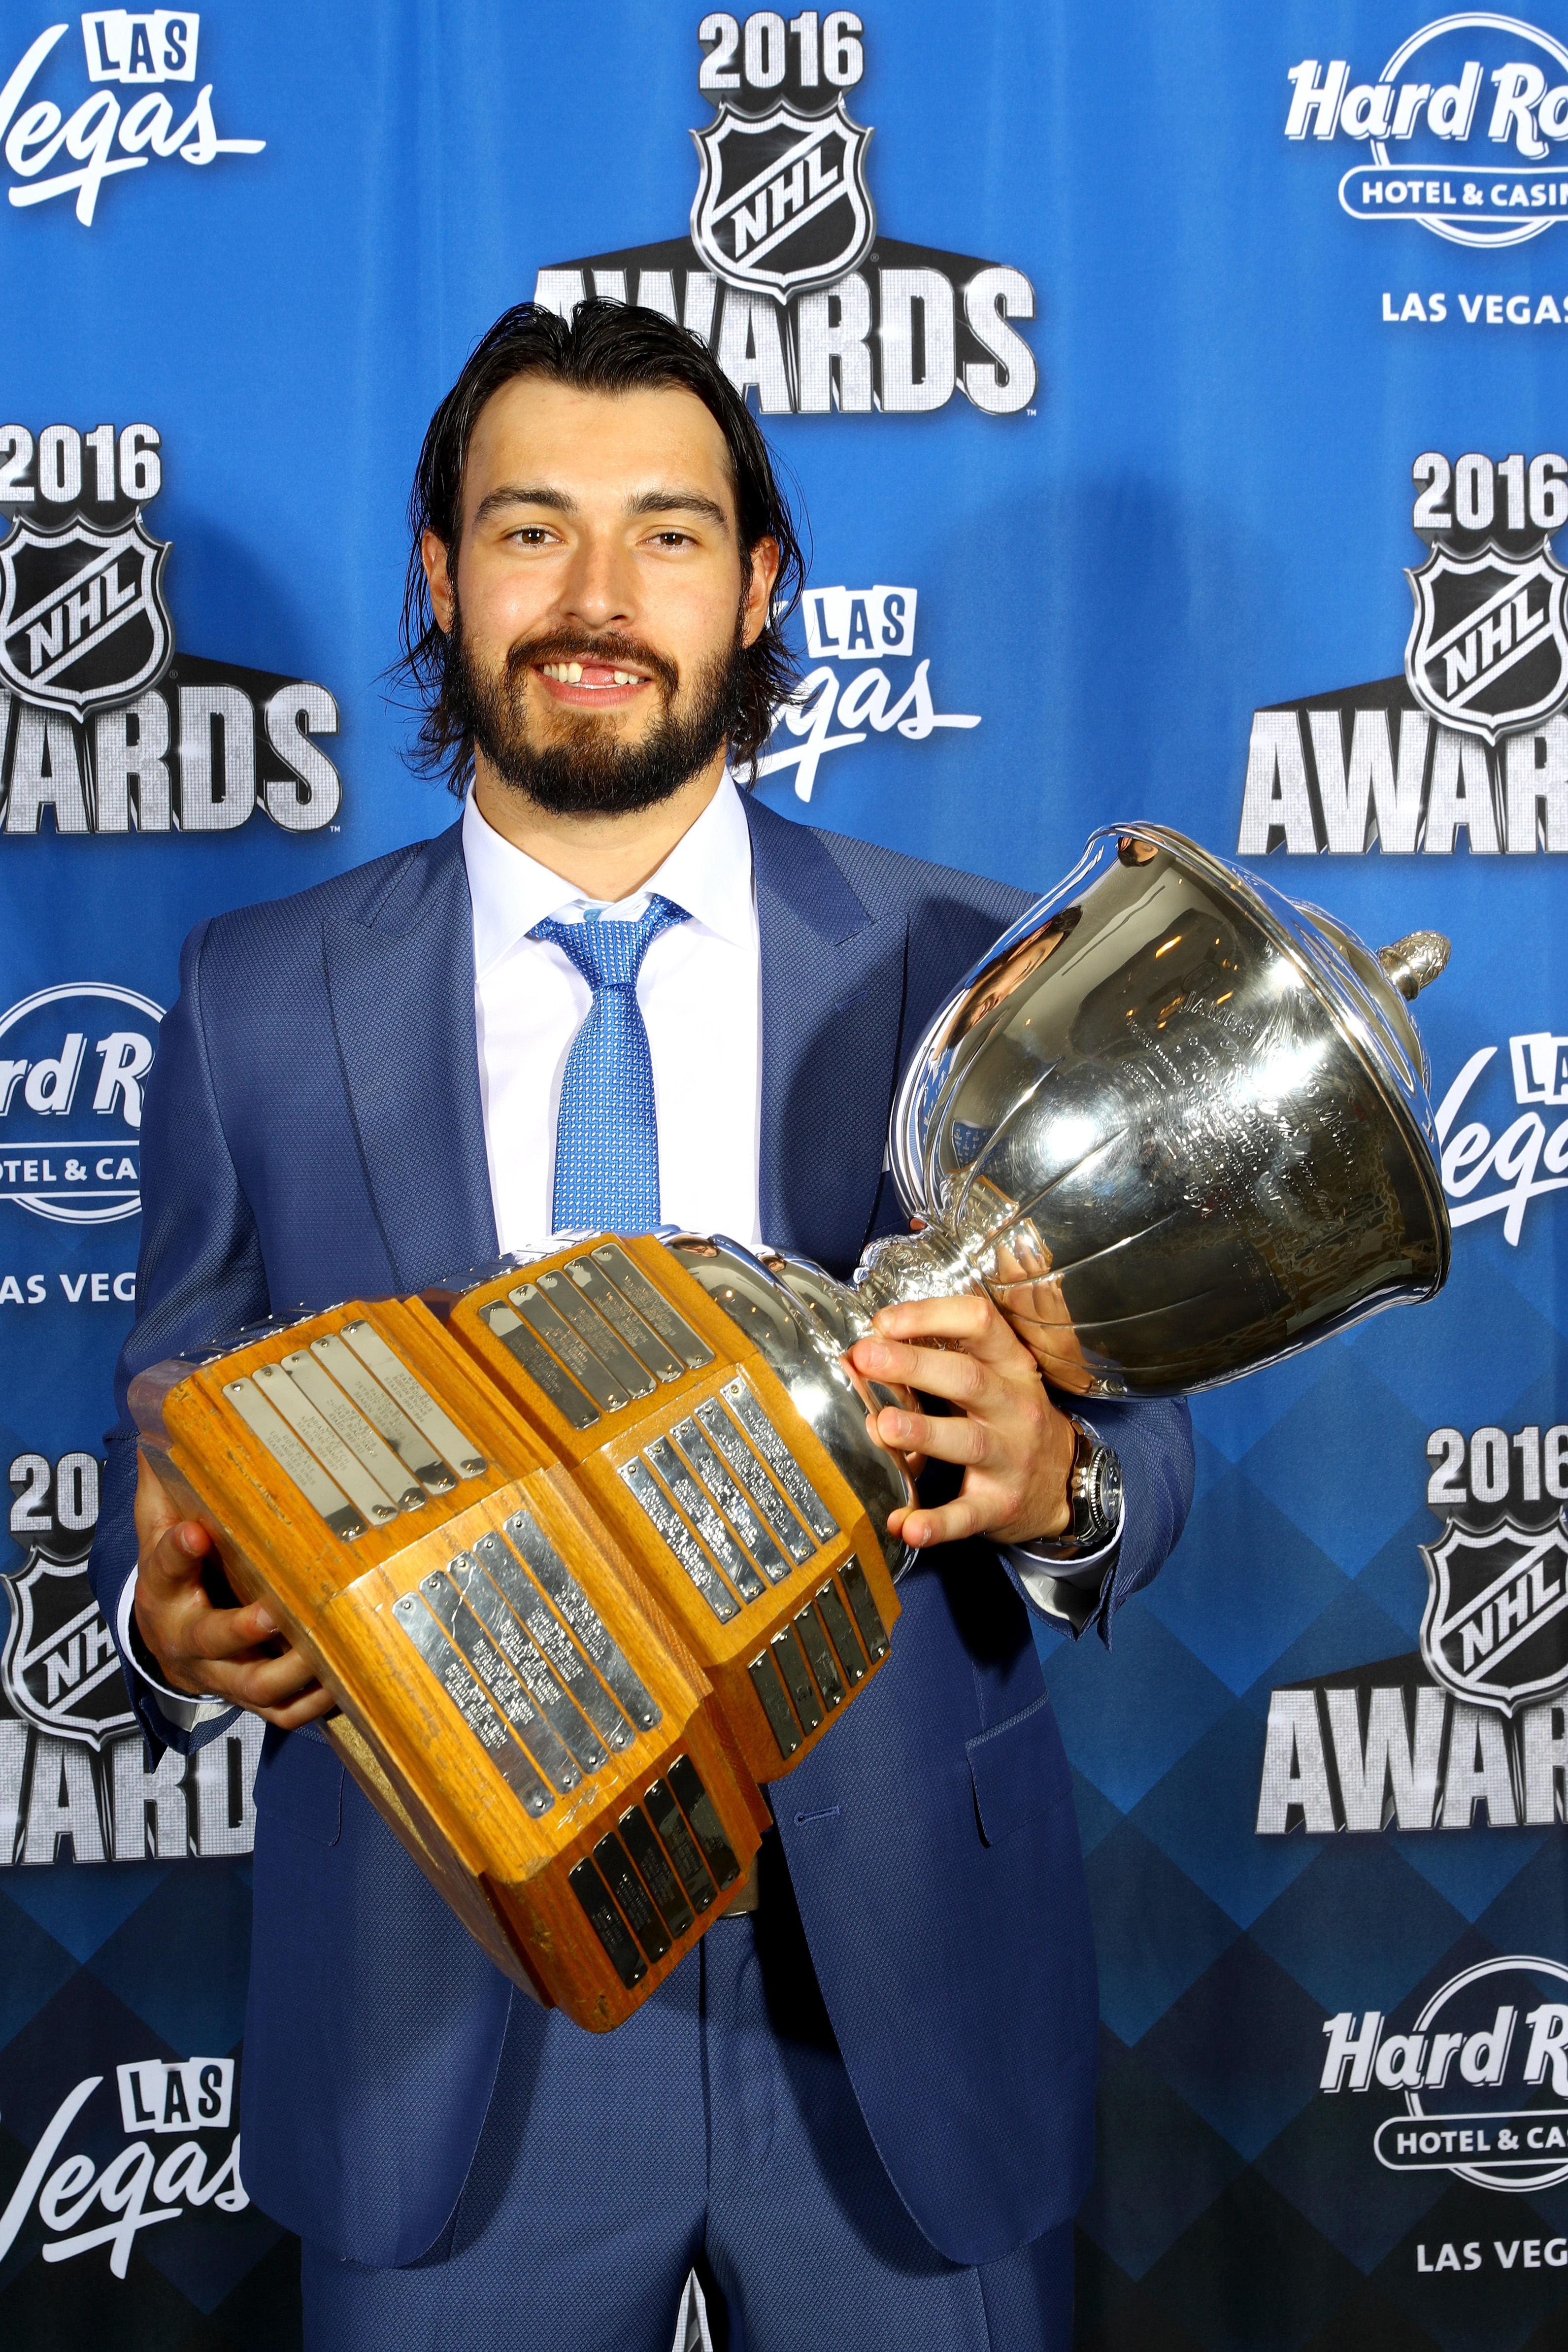 The NHL awards race: Drew Doughty appears headed to his first Norris Trophy